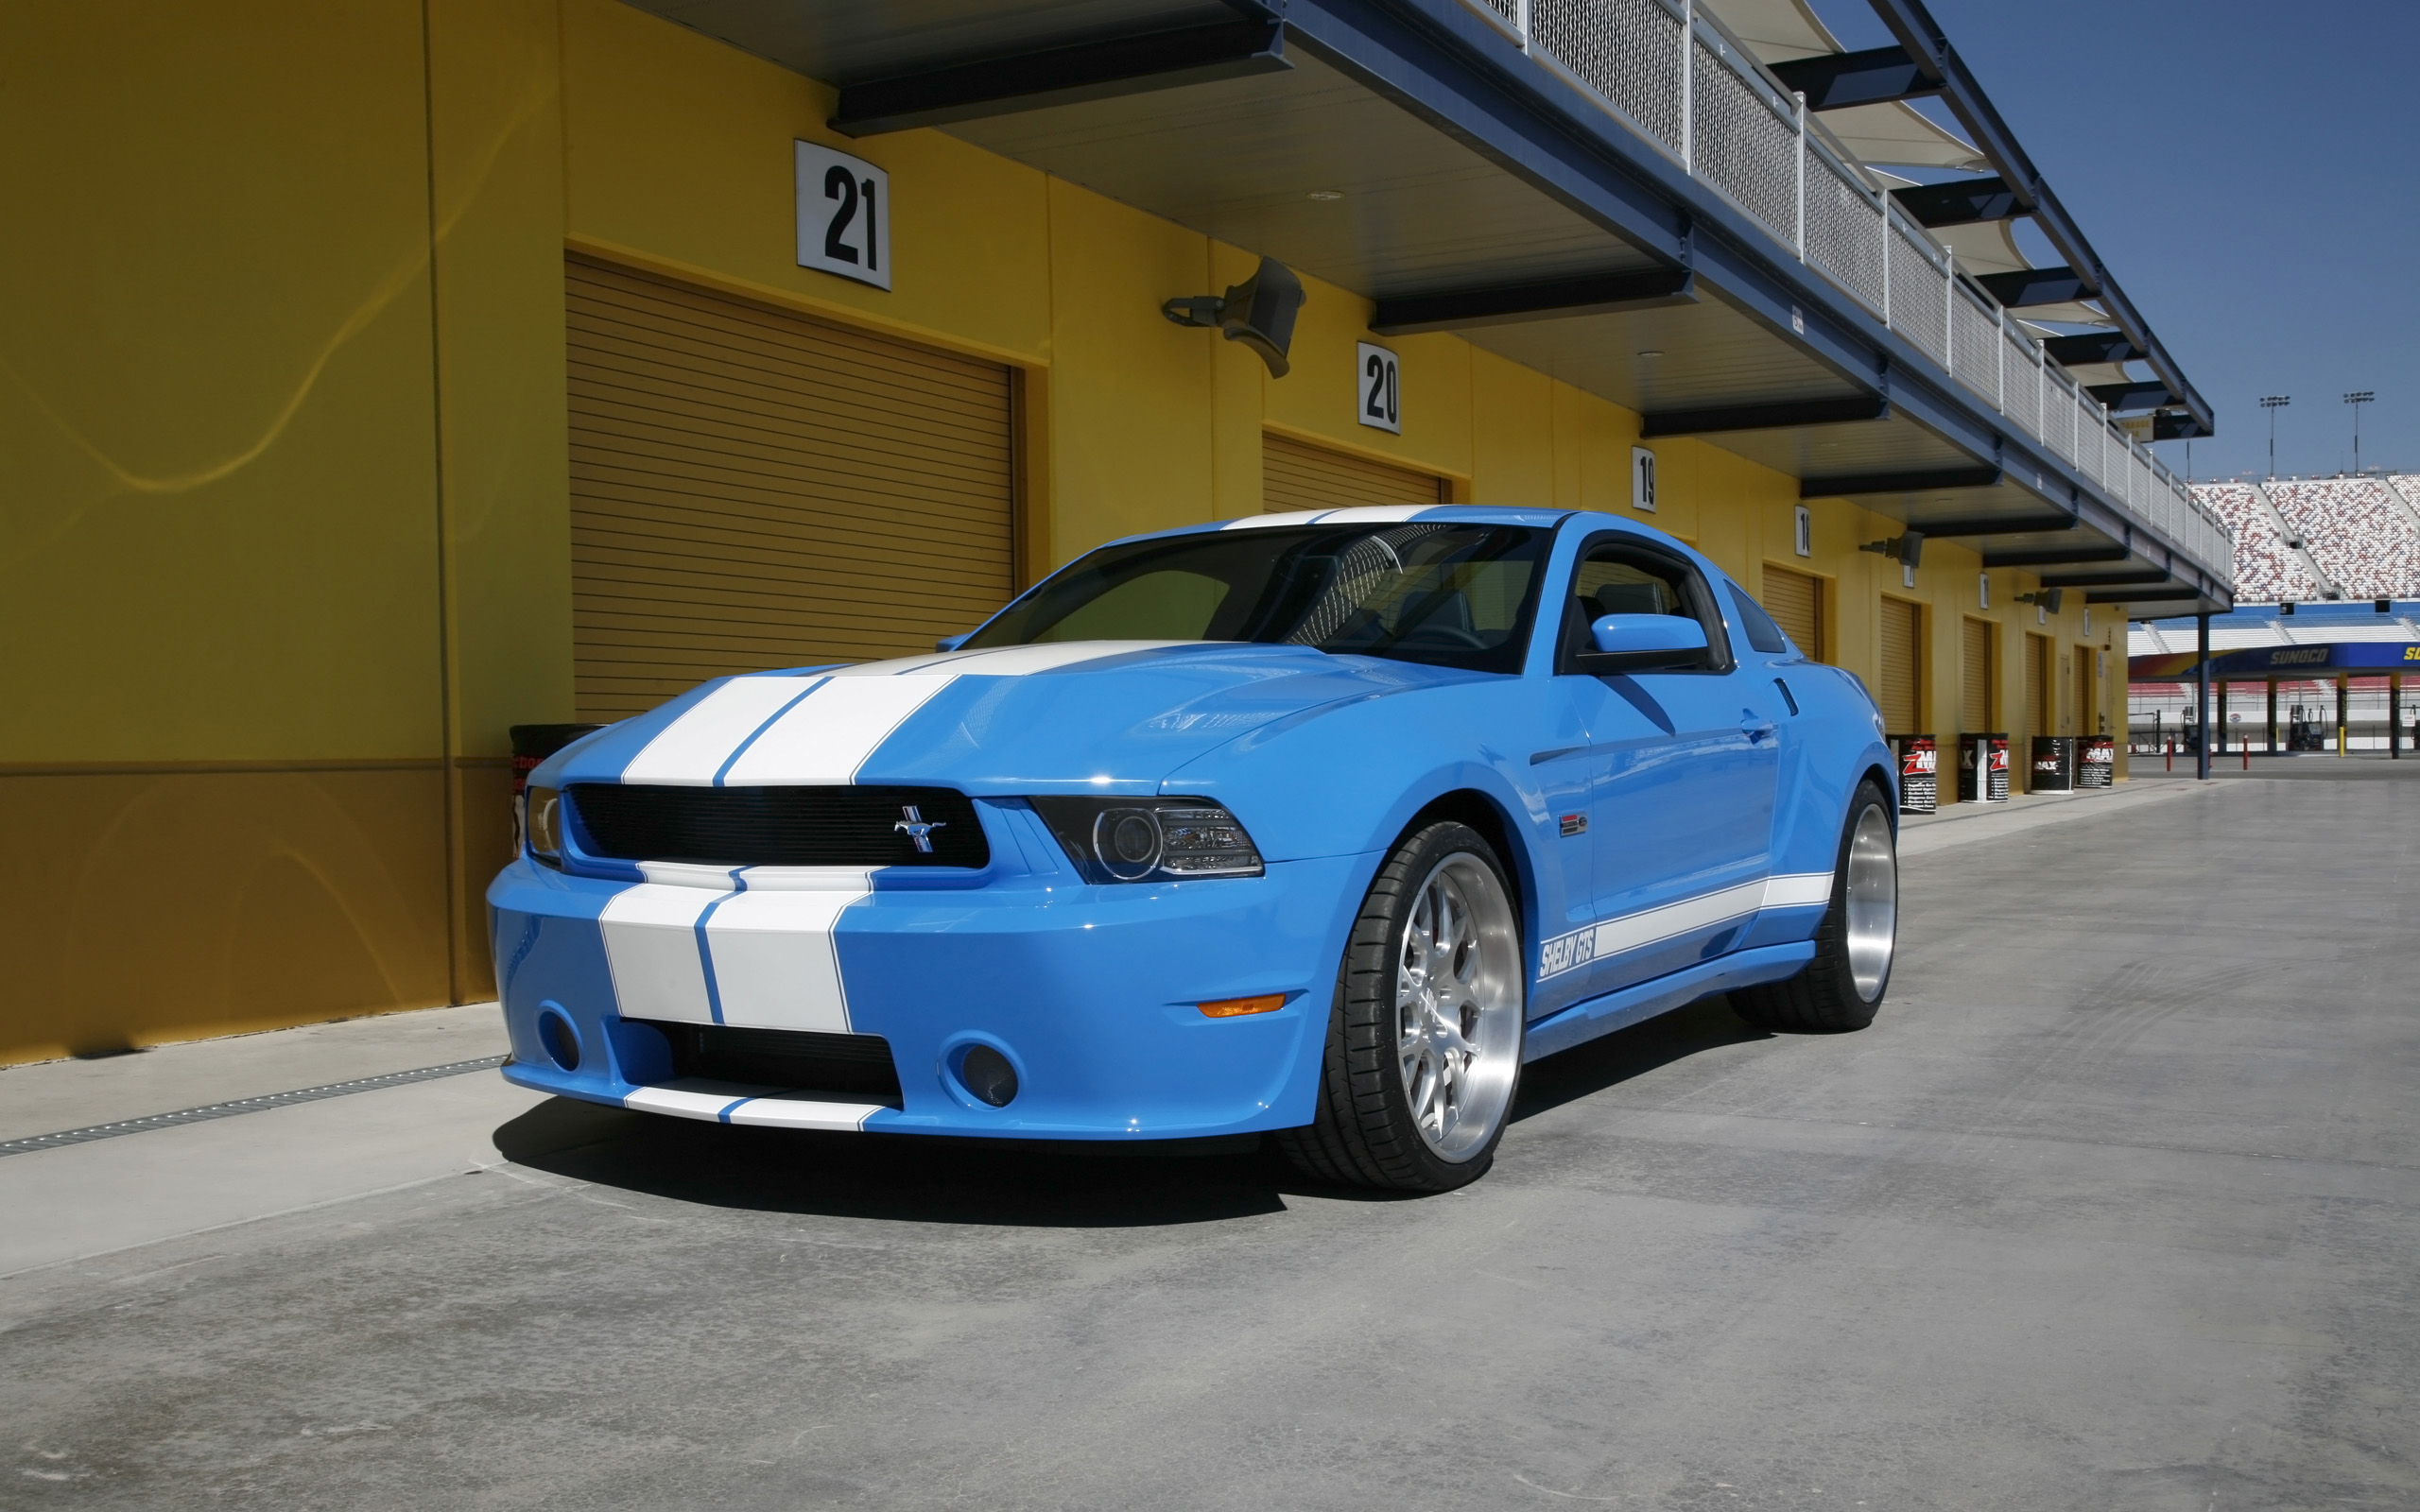 2013, Shelby, Gts, Ford, Mustang, Muscle, Supercar, Hf Wallpaper